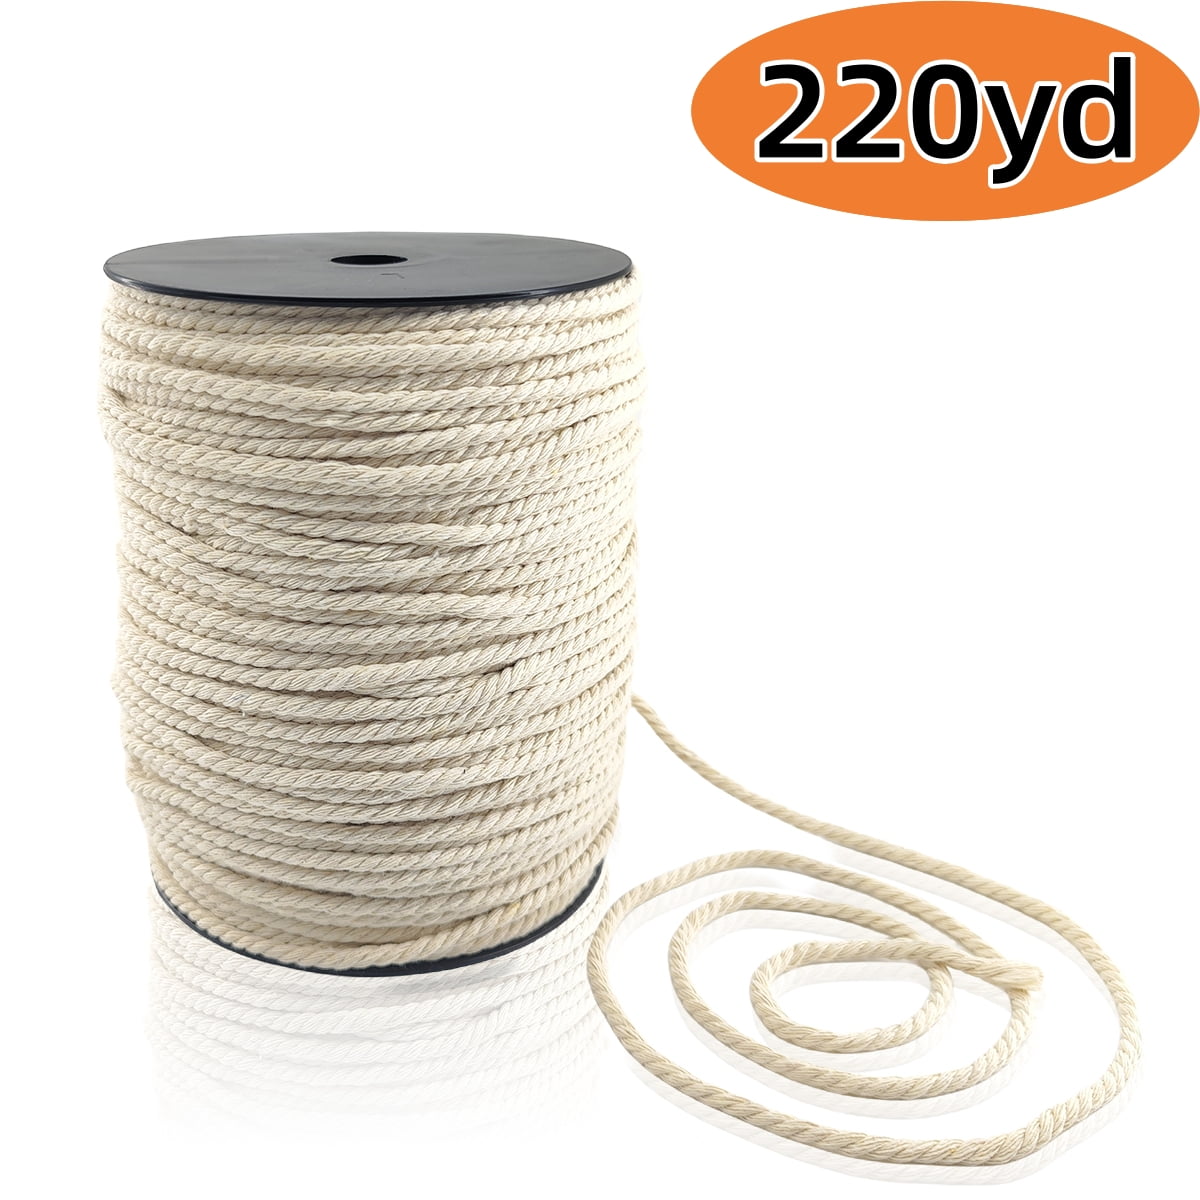 Jute Twine - Brown Roll Jute Twine for Crafts - Soft Yet Strong Natural  Jute String - Burlap String for Packaging, Wrapping, 2ply 338' Materials 